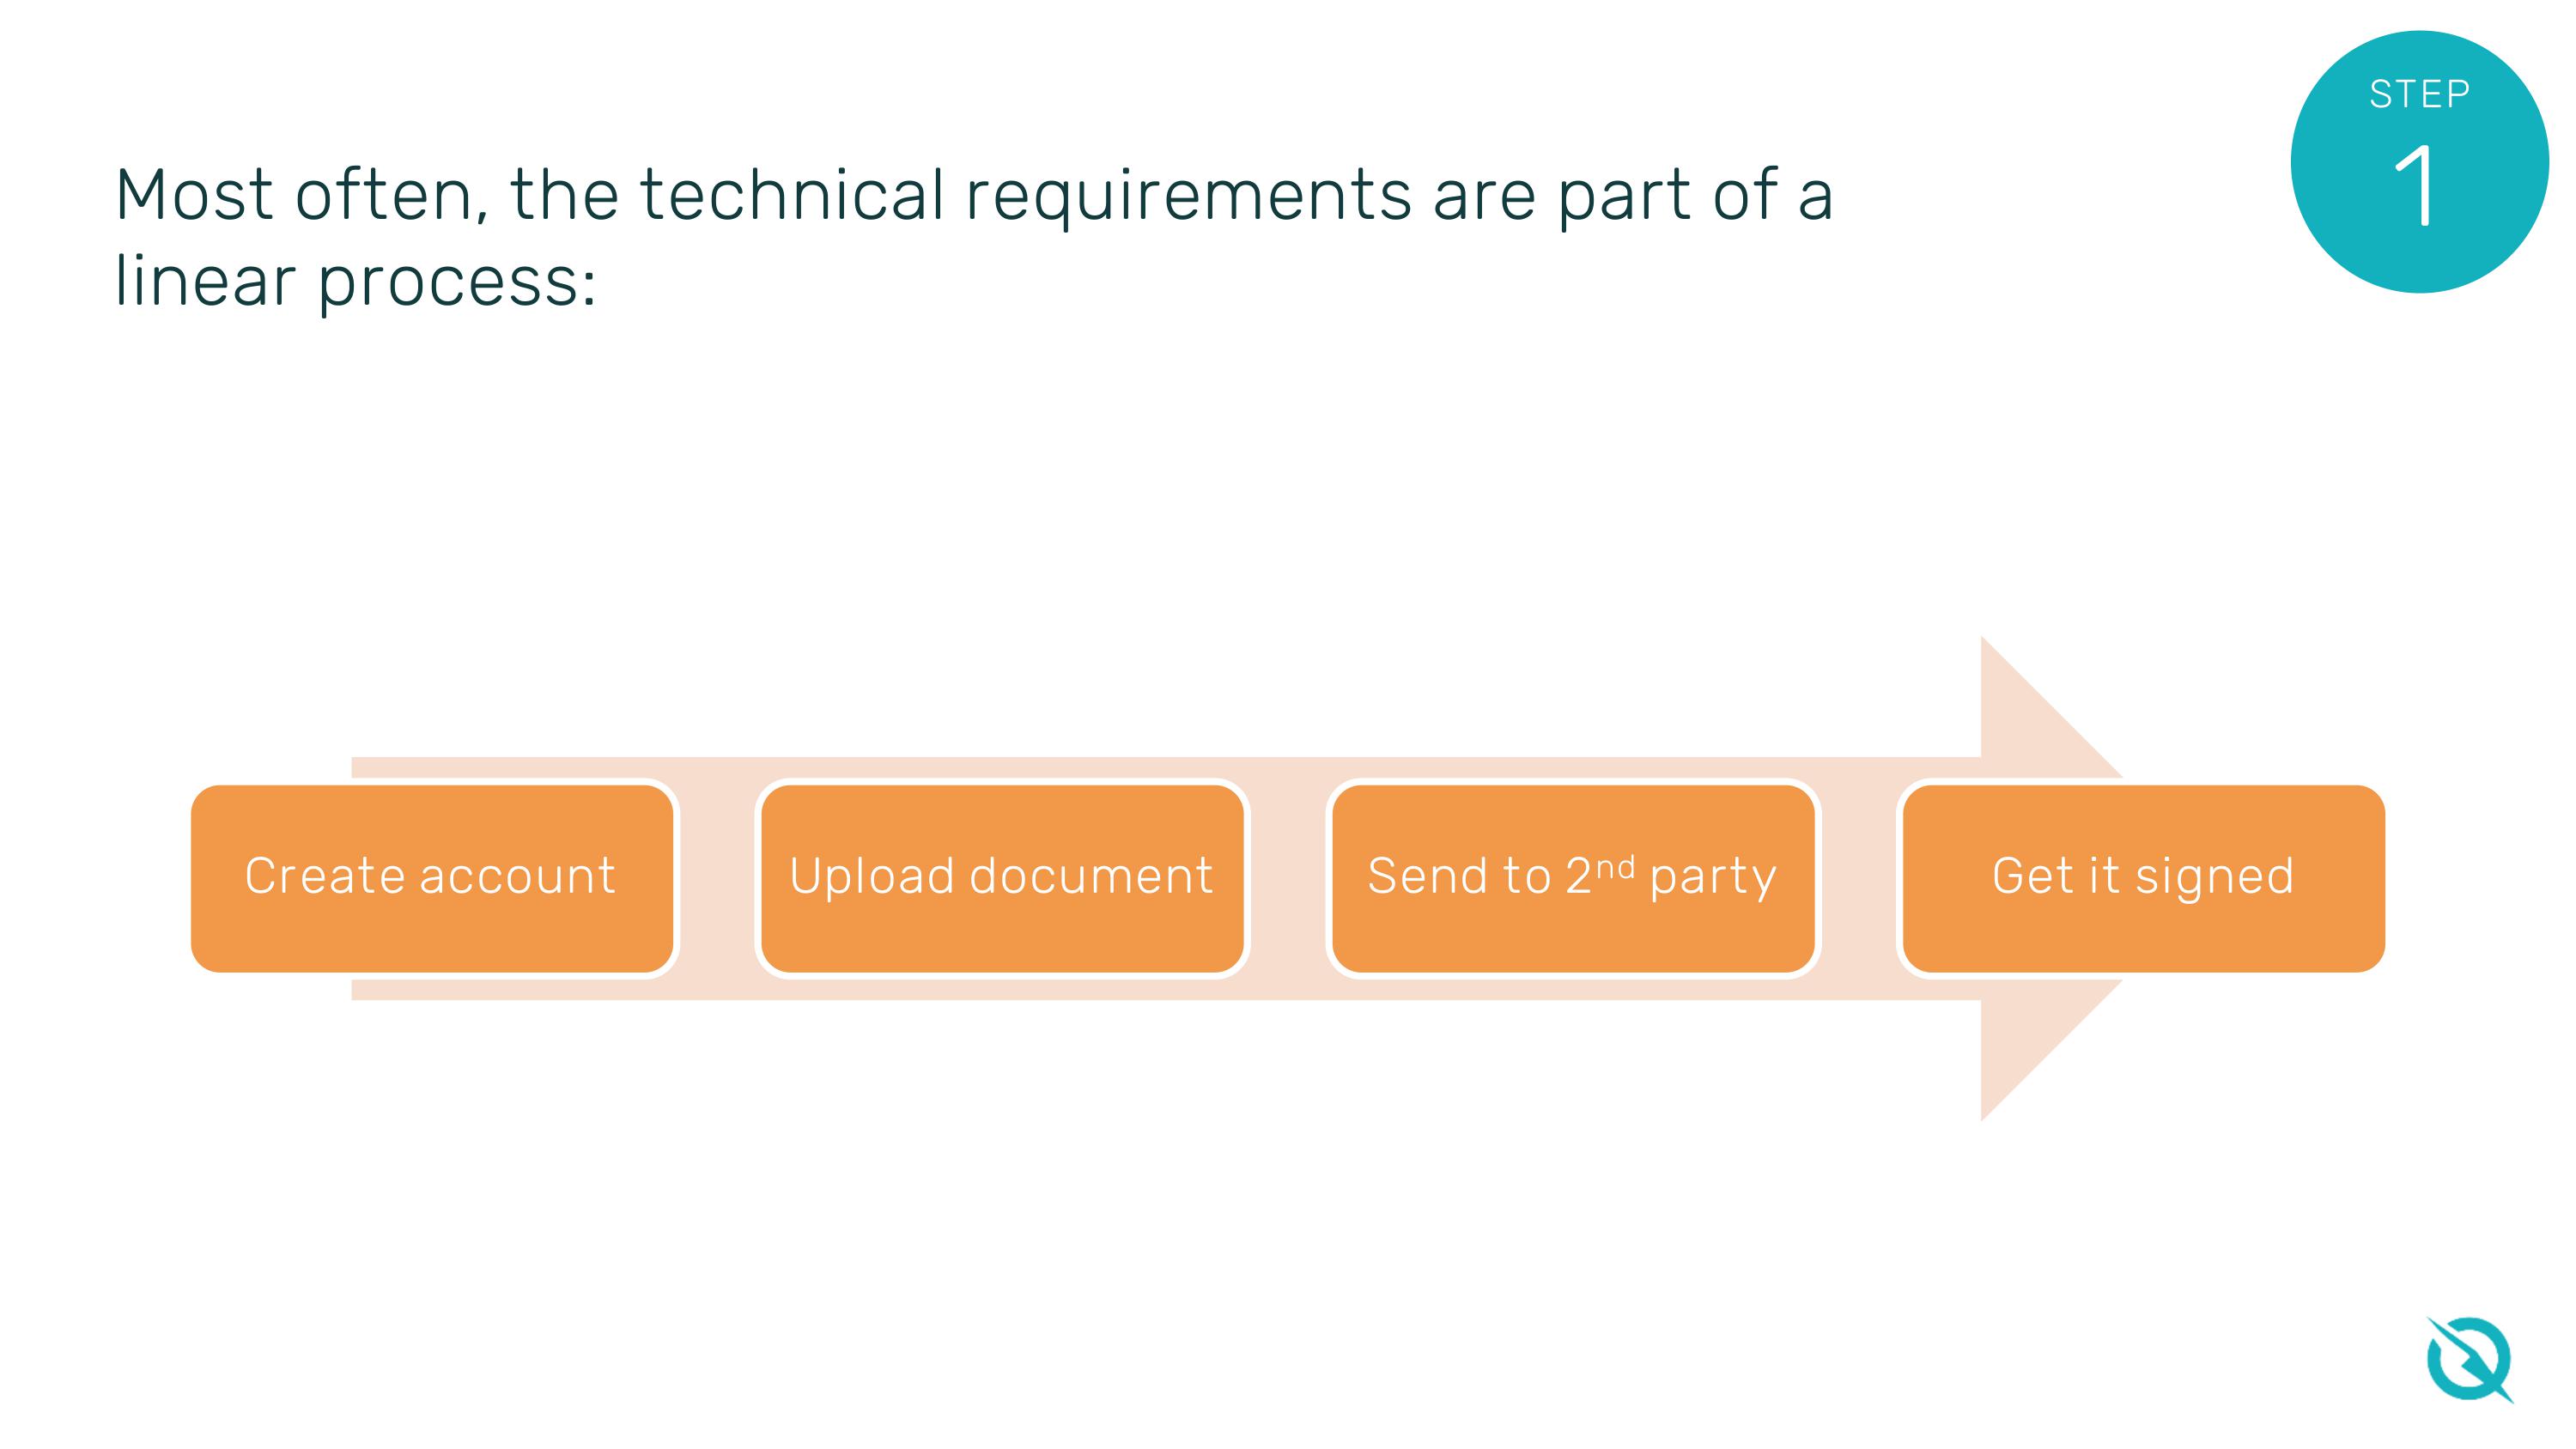 One Metric for User Onboarding: An illustration showing the technical requirements in the onboarding process